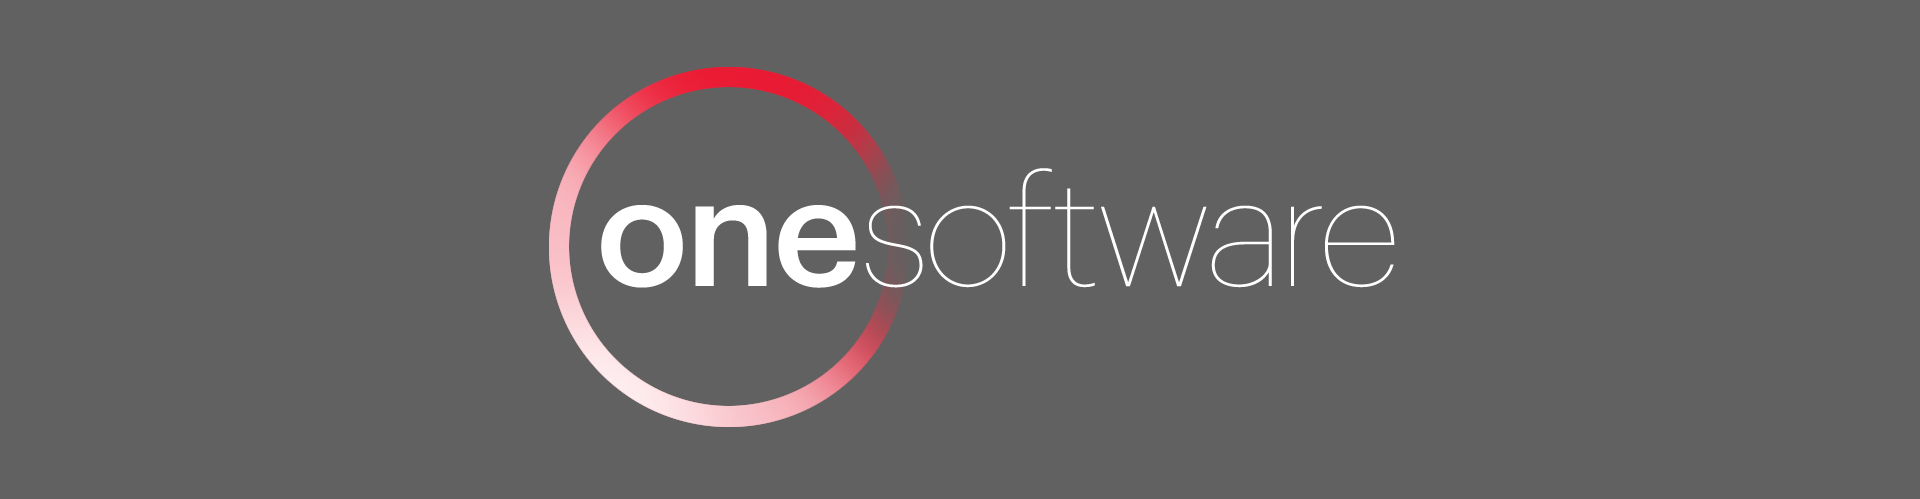 One Software